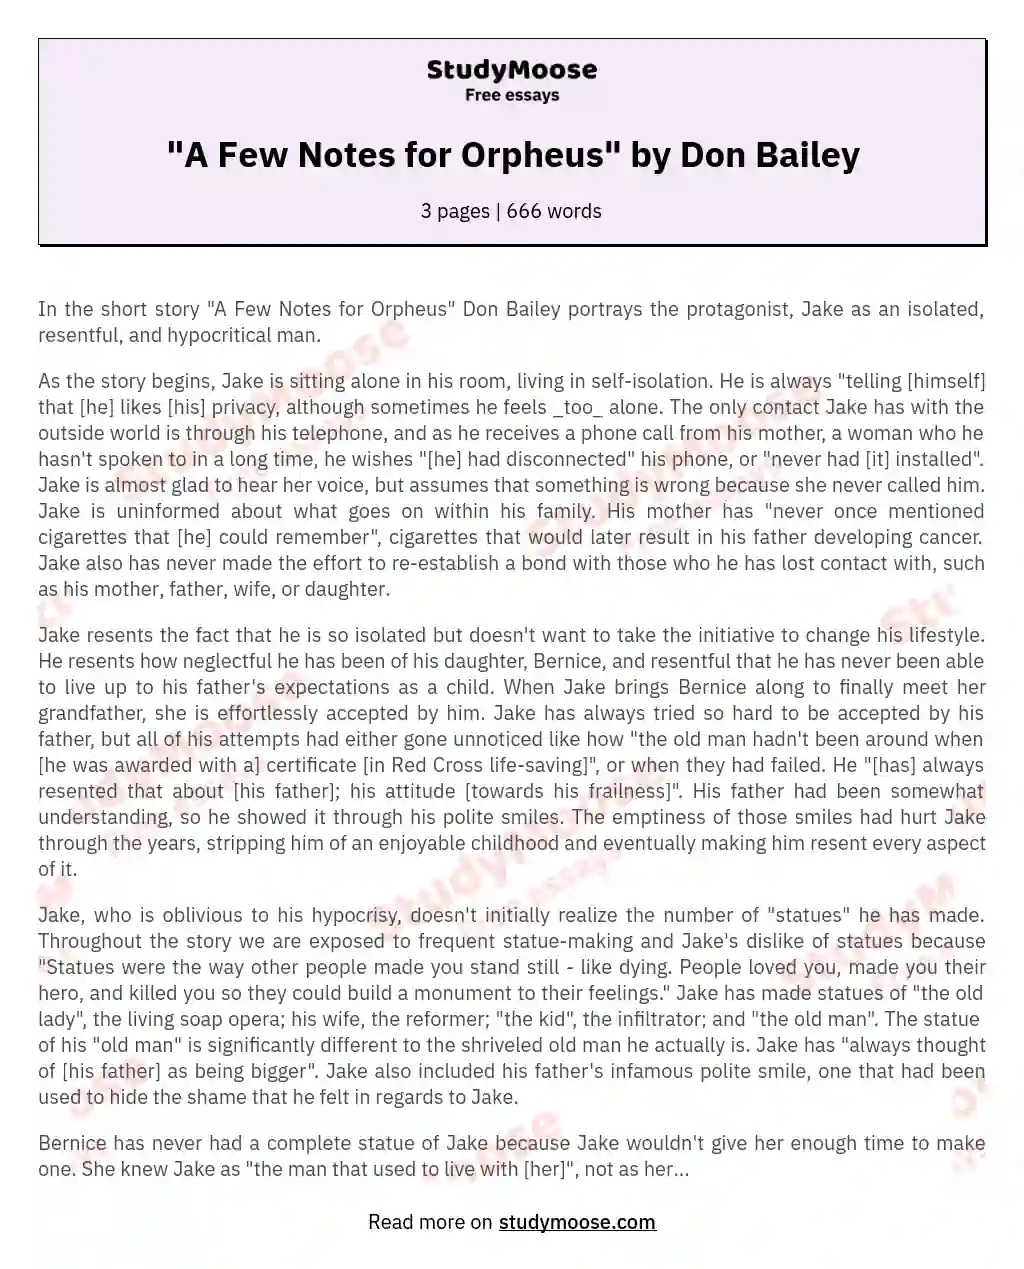 "A Few Notes for Orpheus" by Don Bailey essay